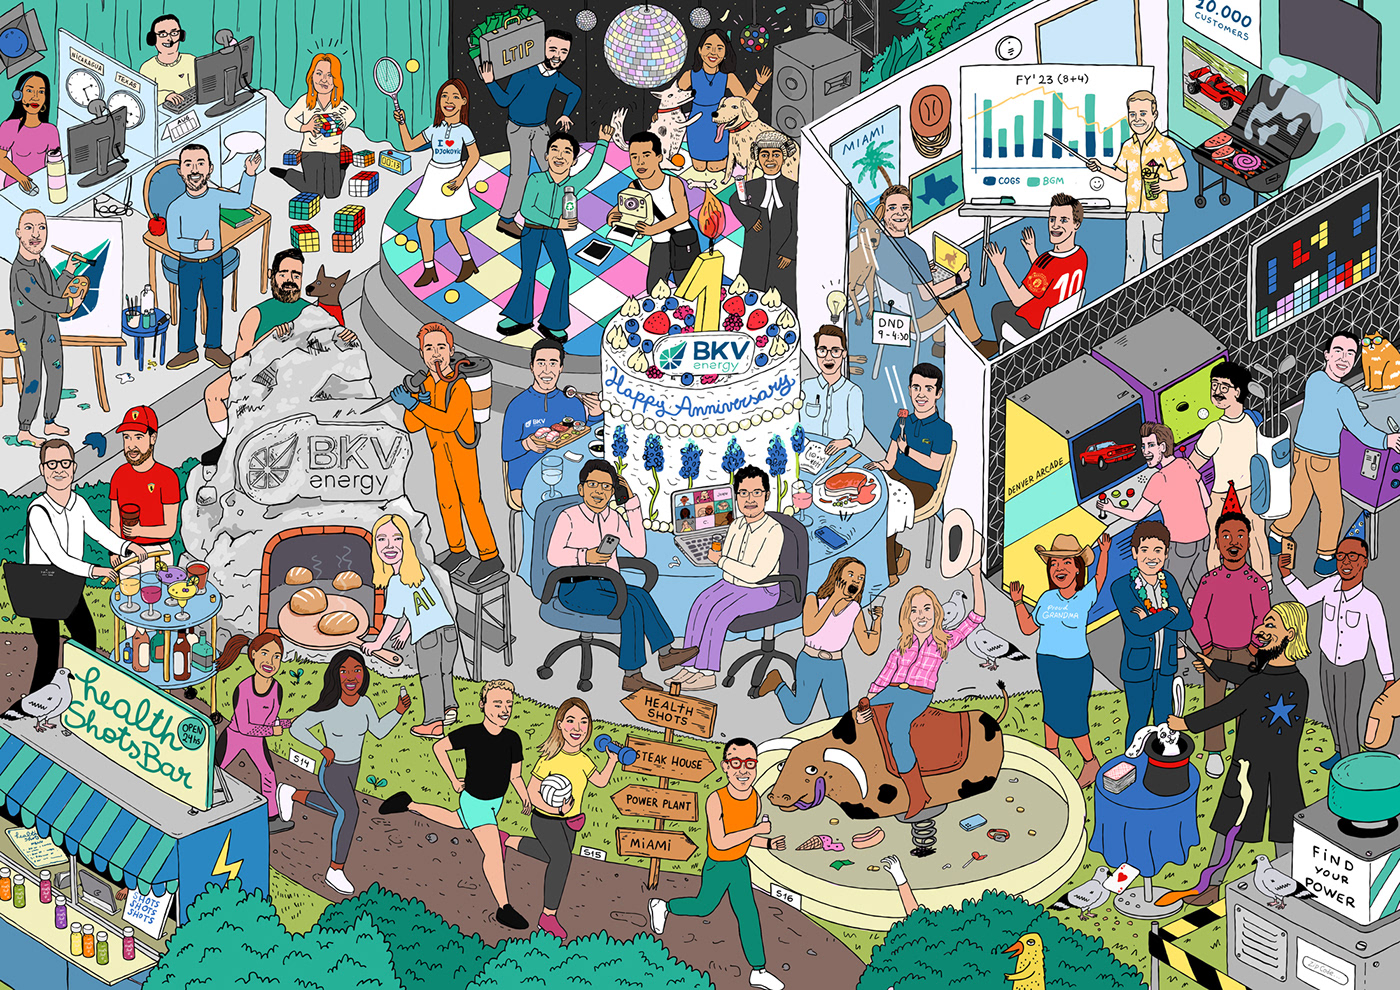 seek and find search and find Where's Waldo where's wally isometric illustration portrait funny corporate employees charicature